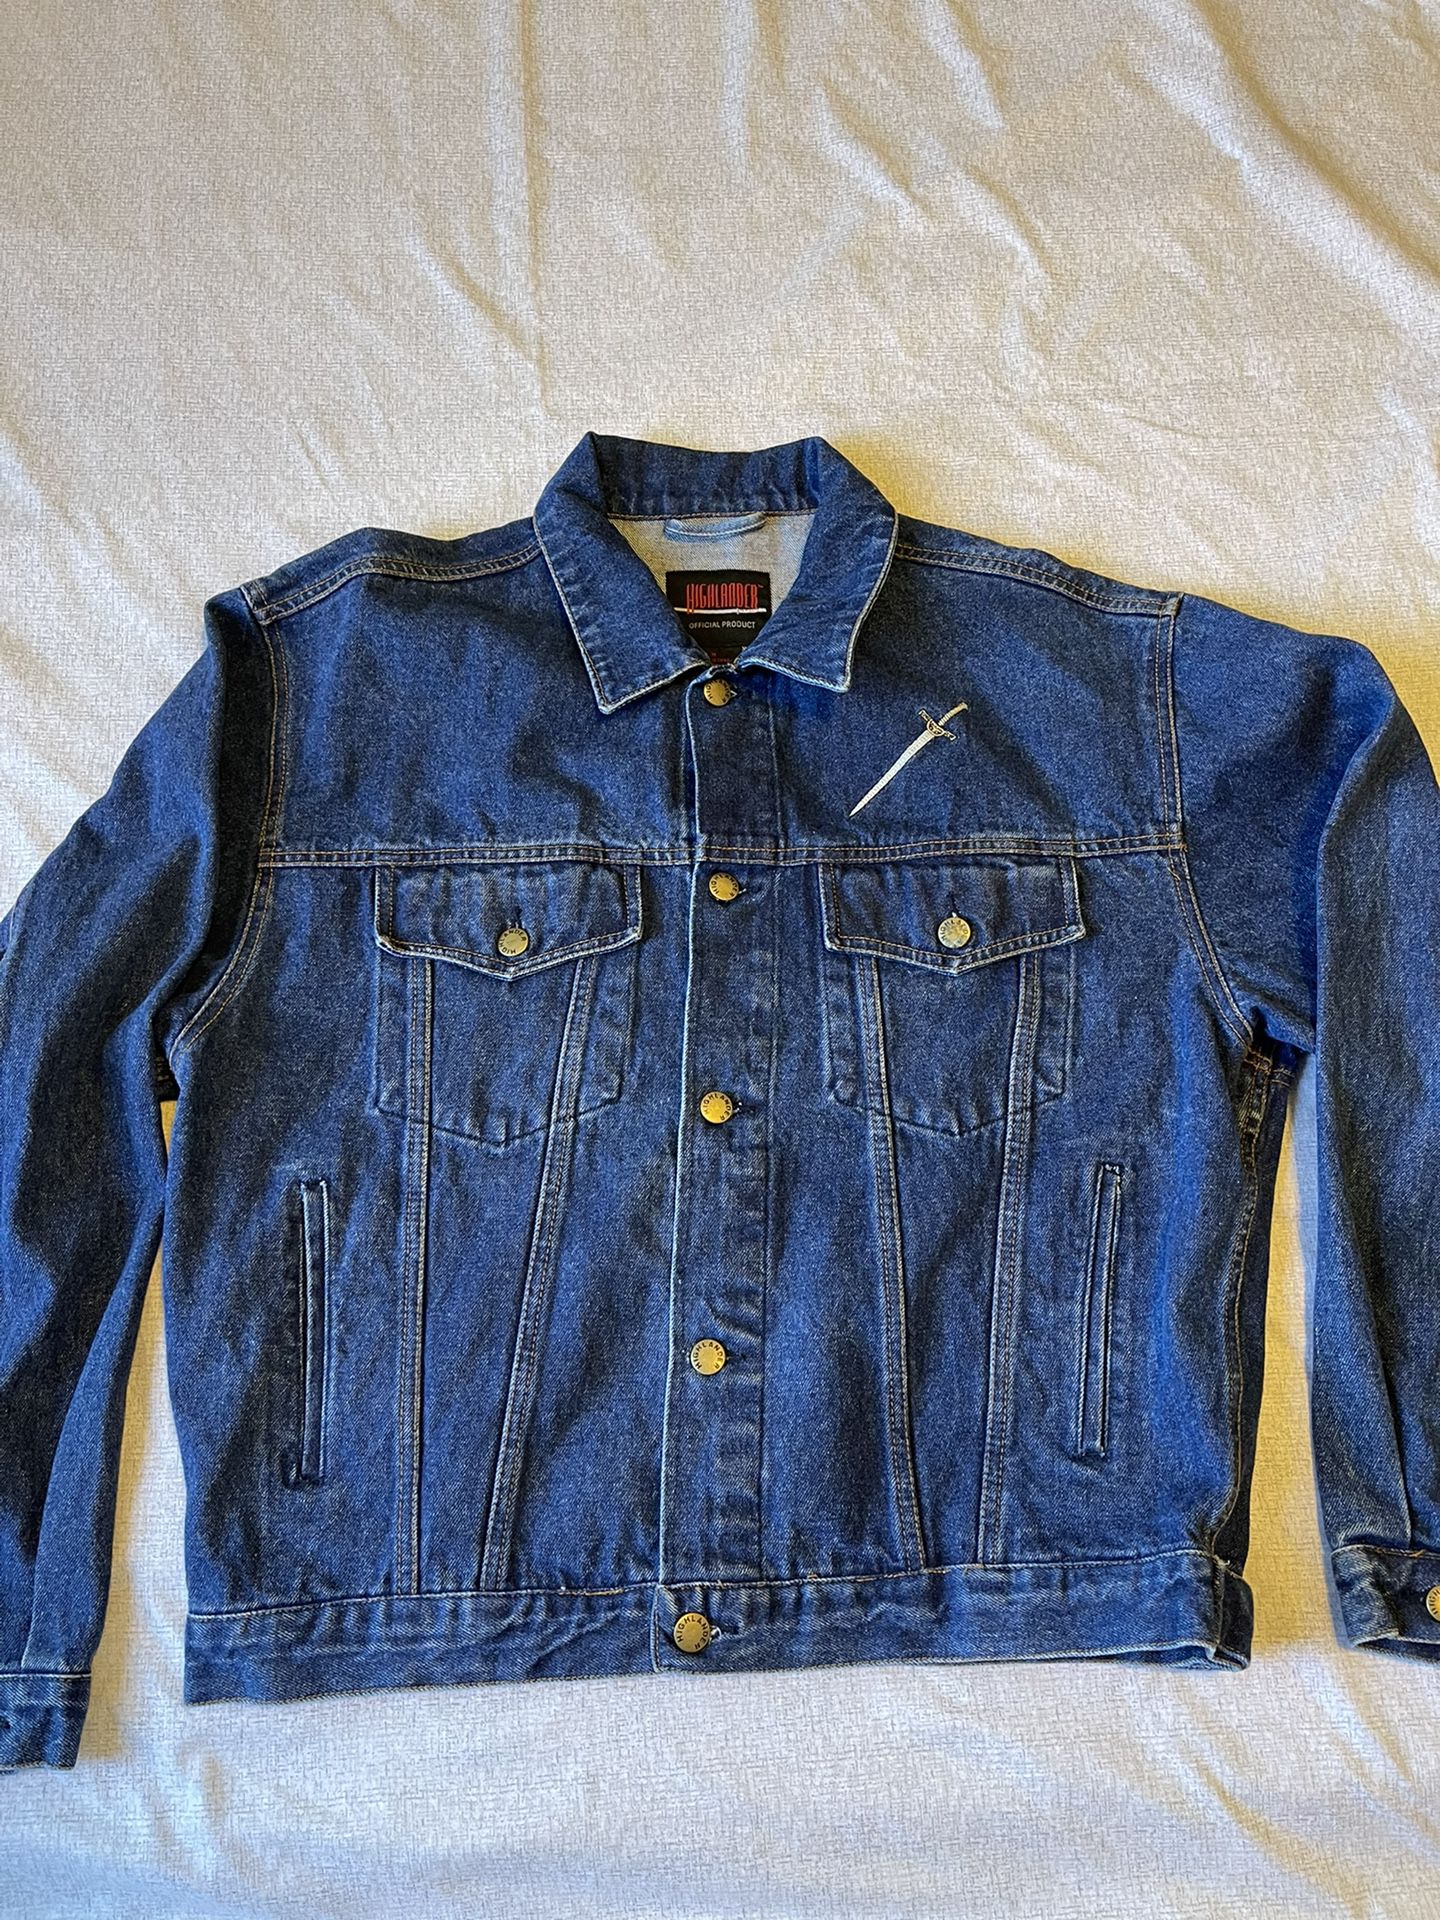 Highlander Size Medium Official Product Promo Denim Jacket Vintage There Can Be